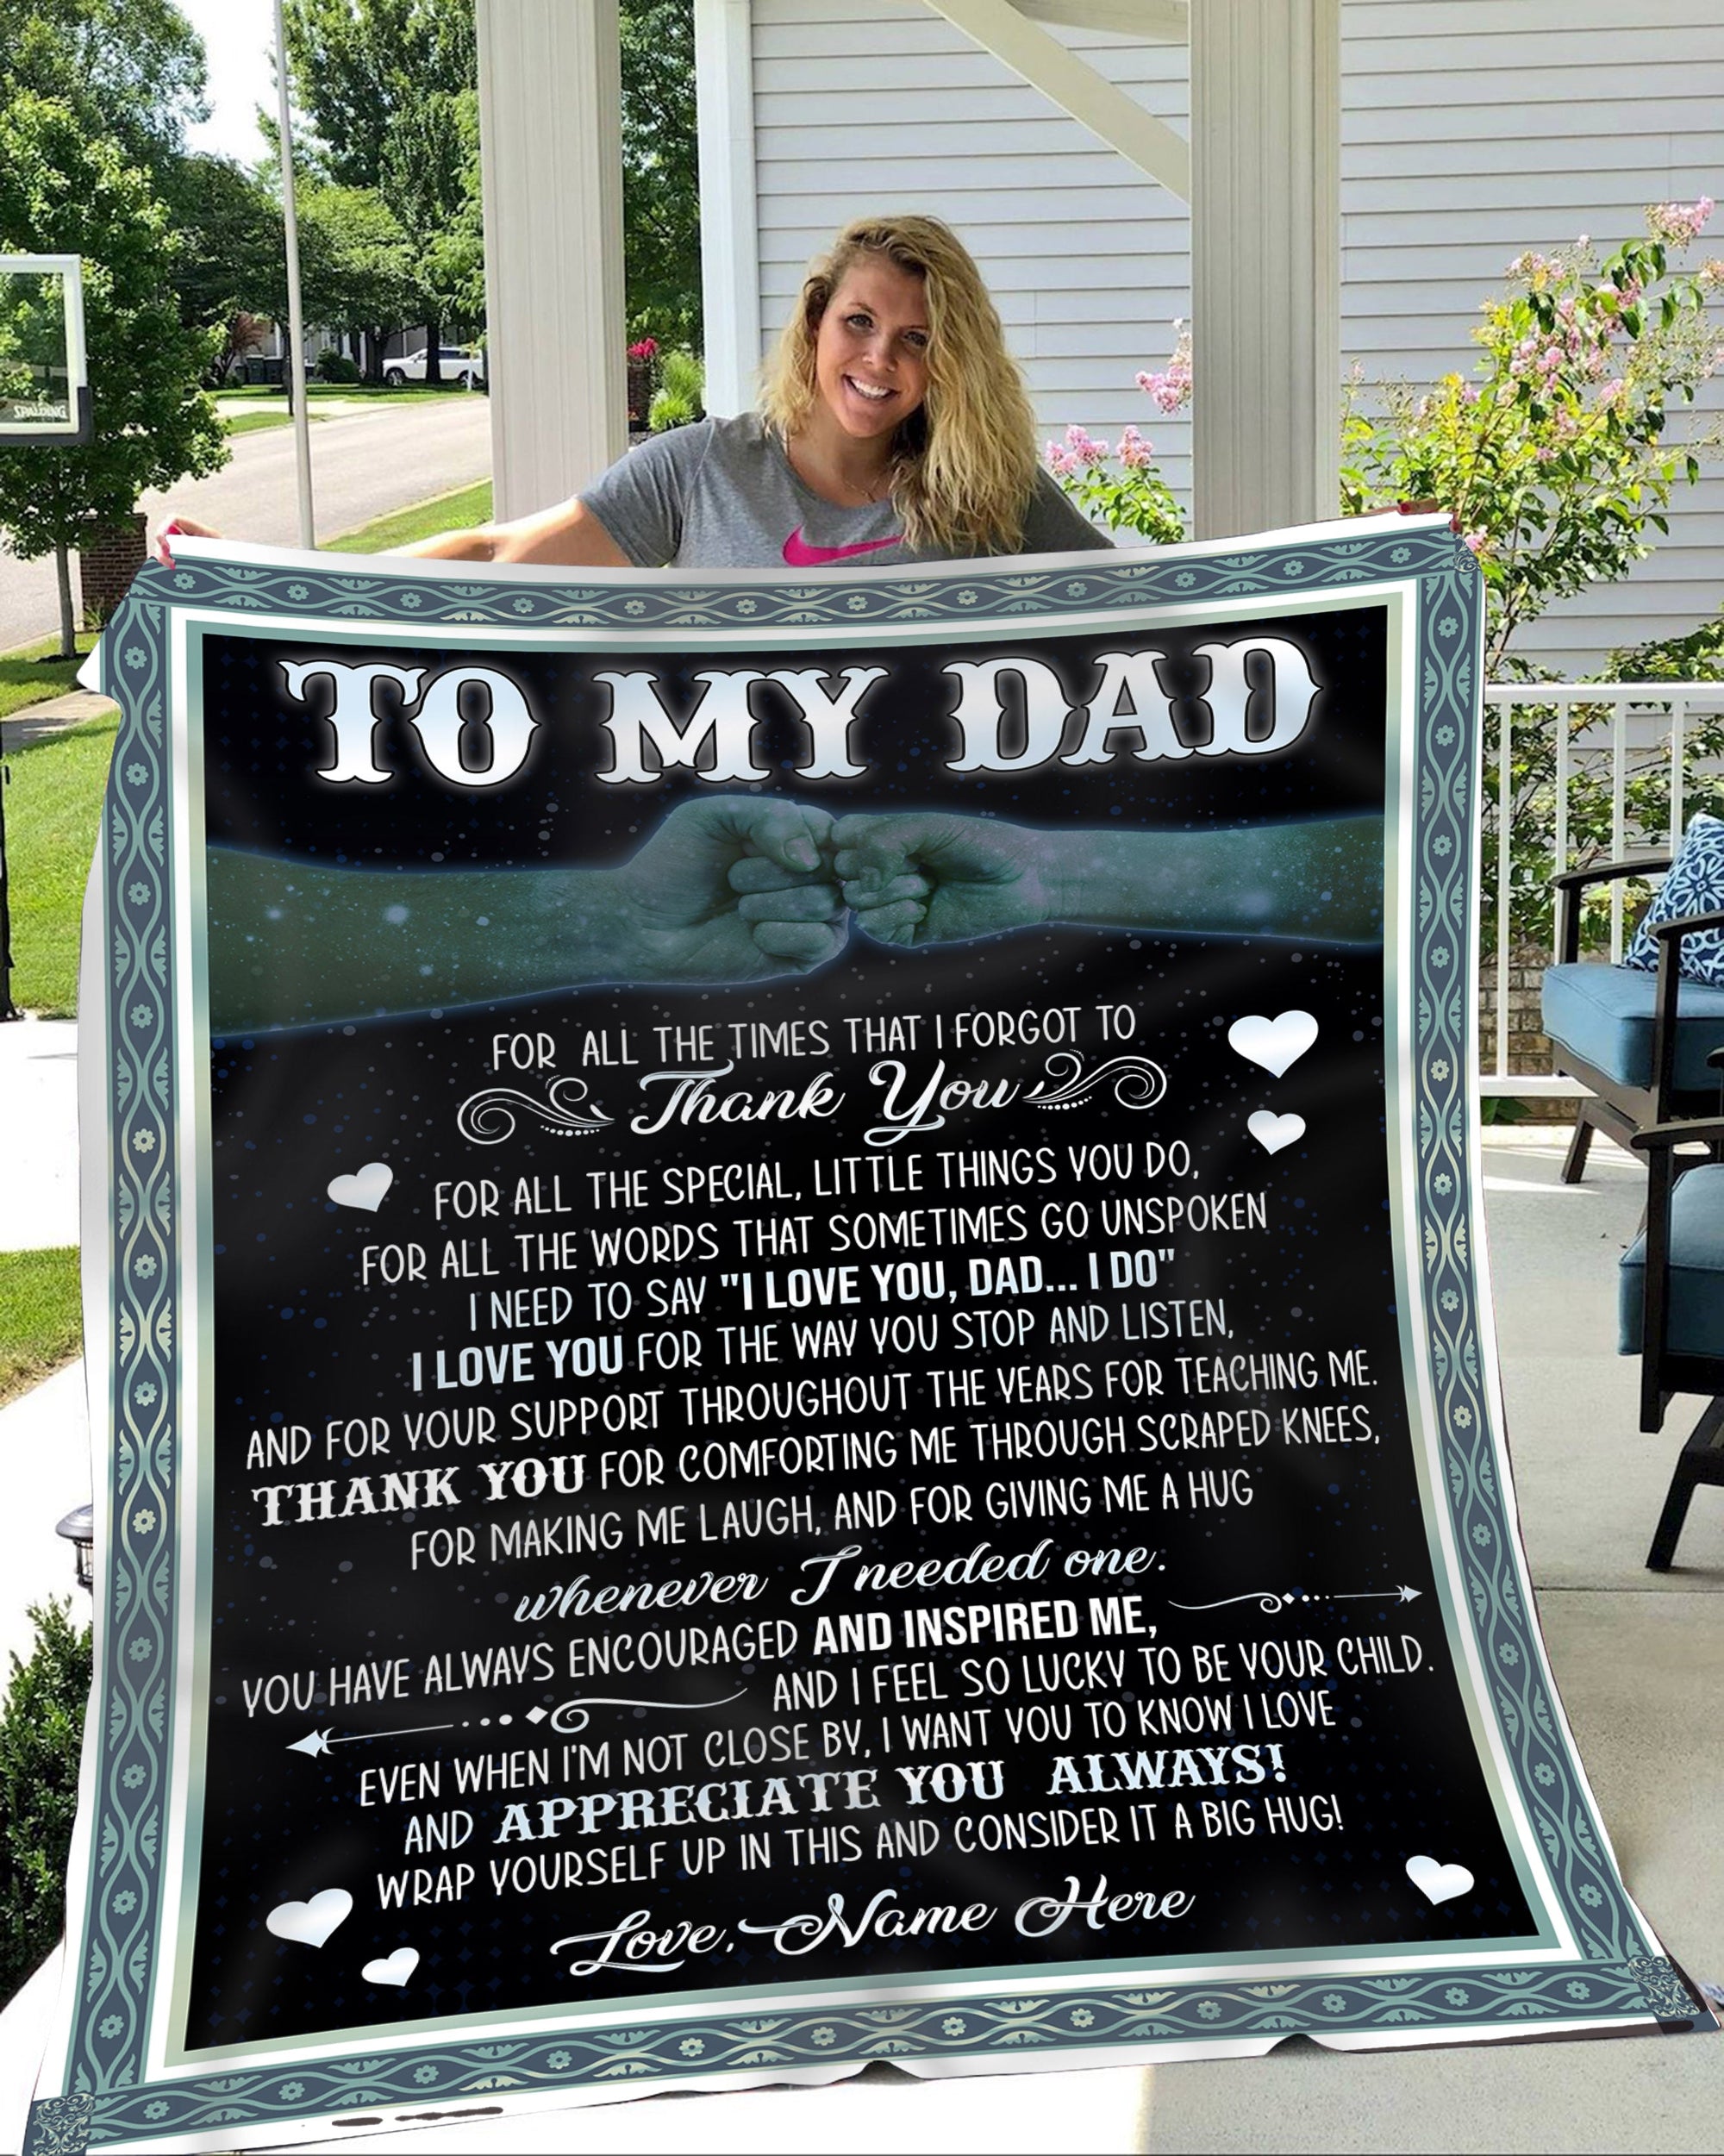 Personalized Blanket To My Dad - Thoughtful Blanket Dad Gift for Father's Day